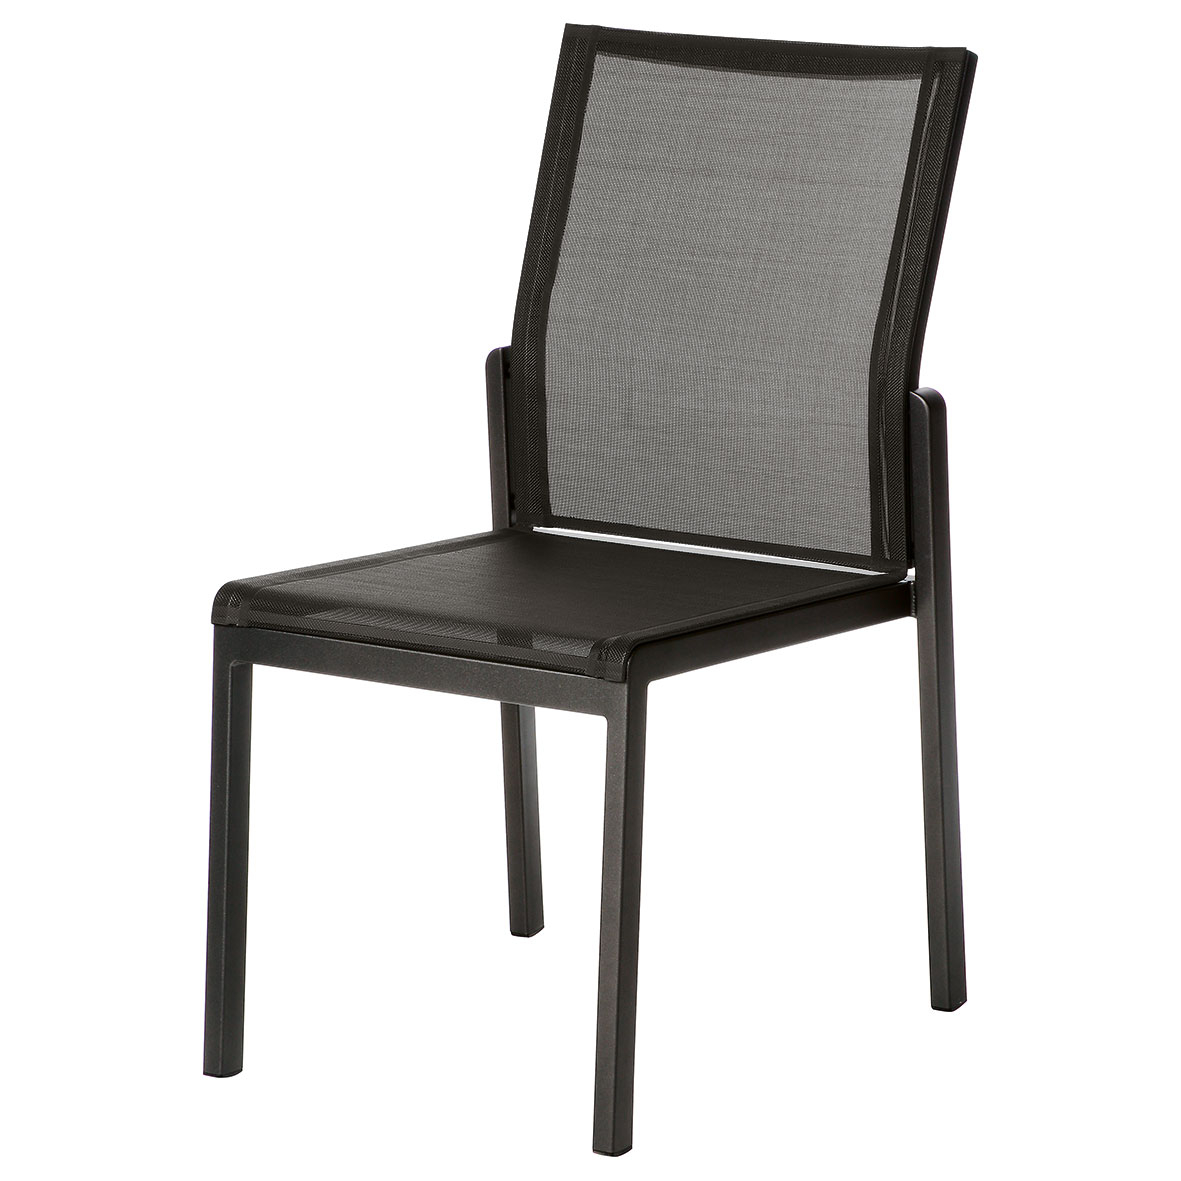 Barlow Tyrie Aura Aluminum Stacking Side Chair